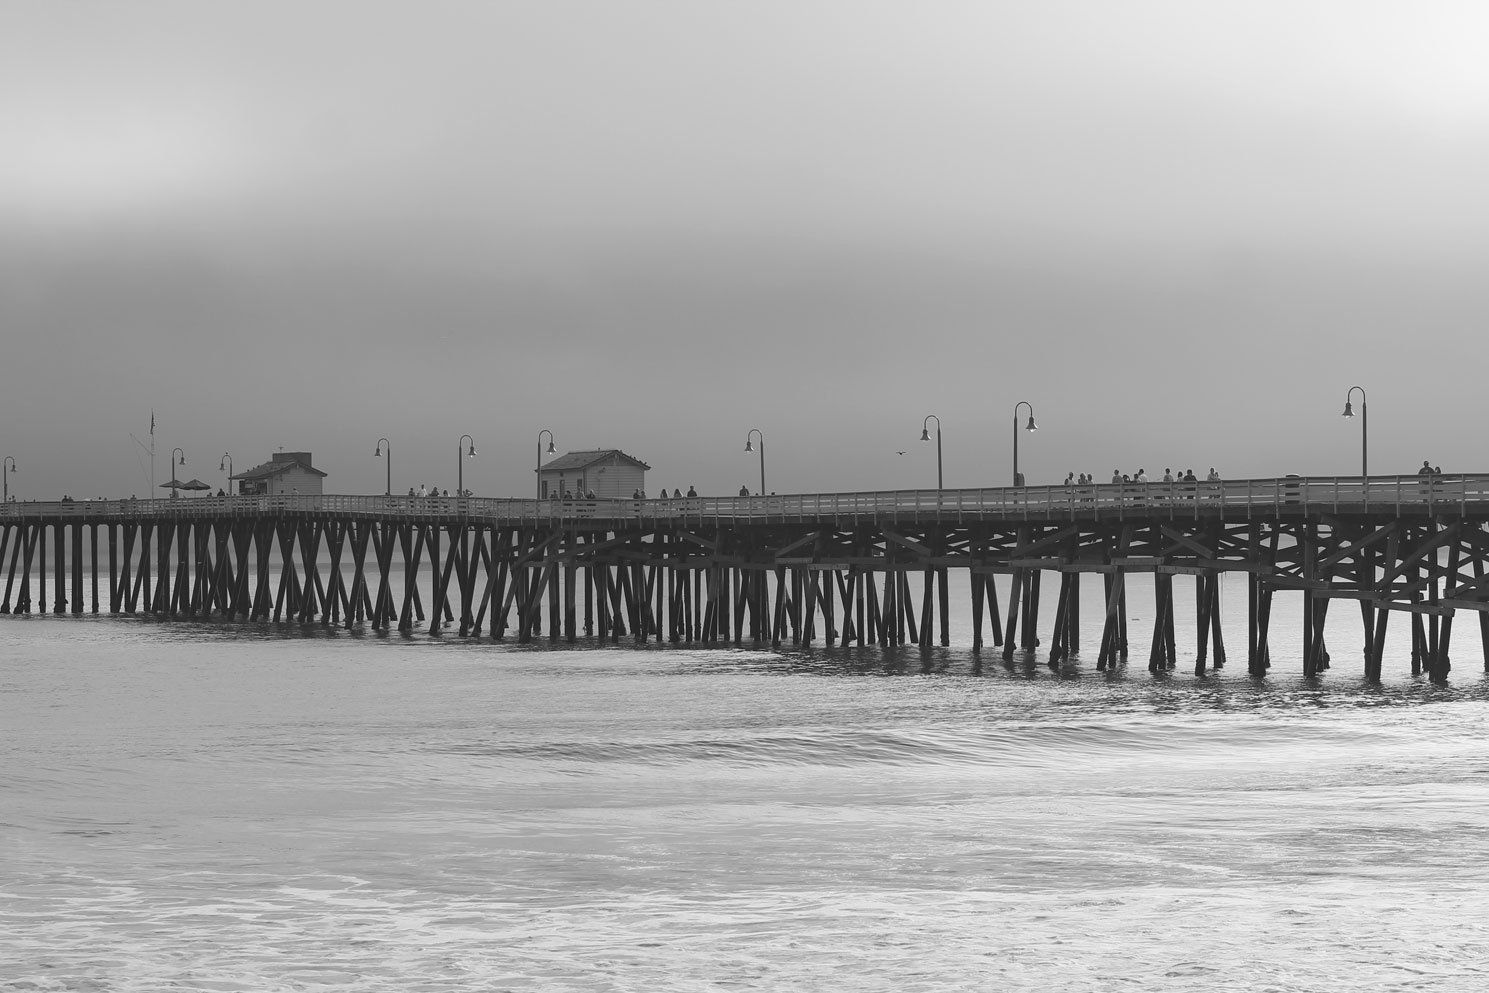 Pier on the waterfront in black and white